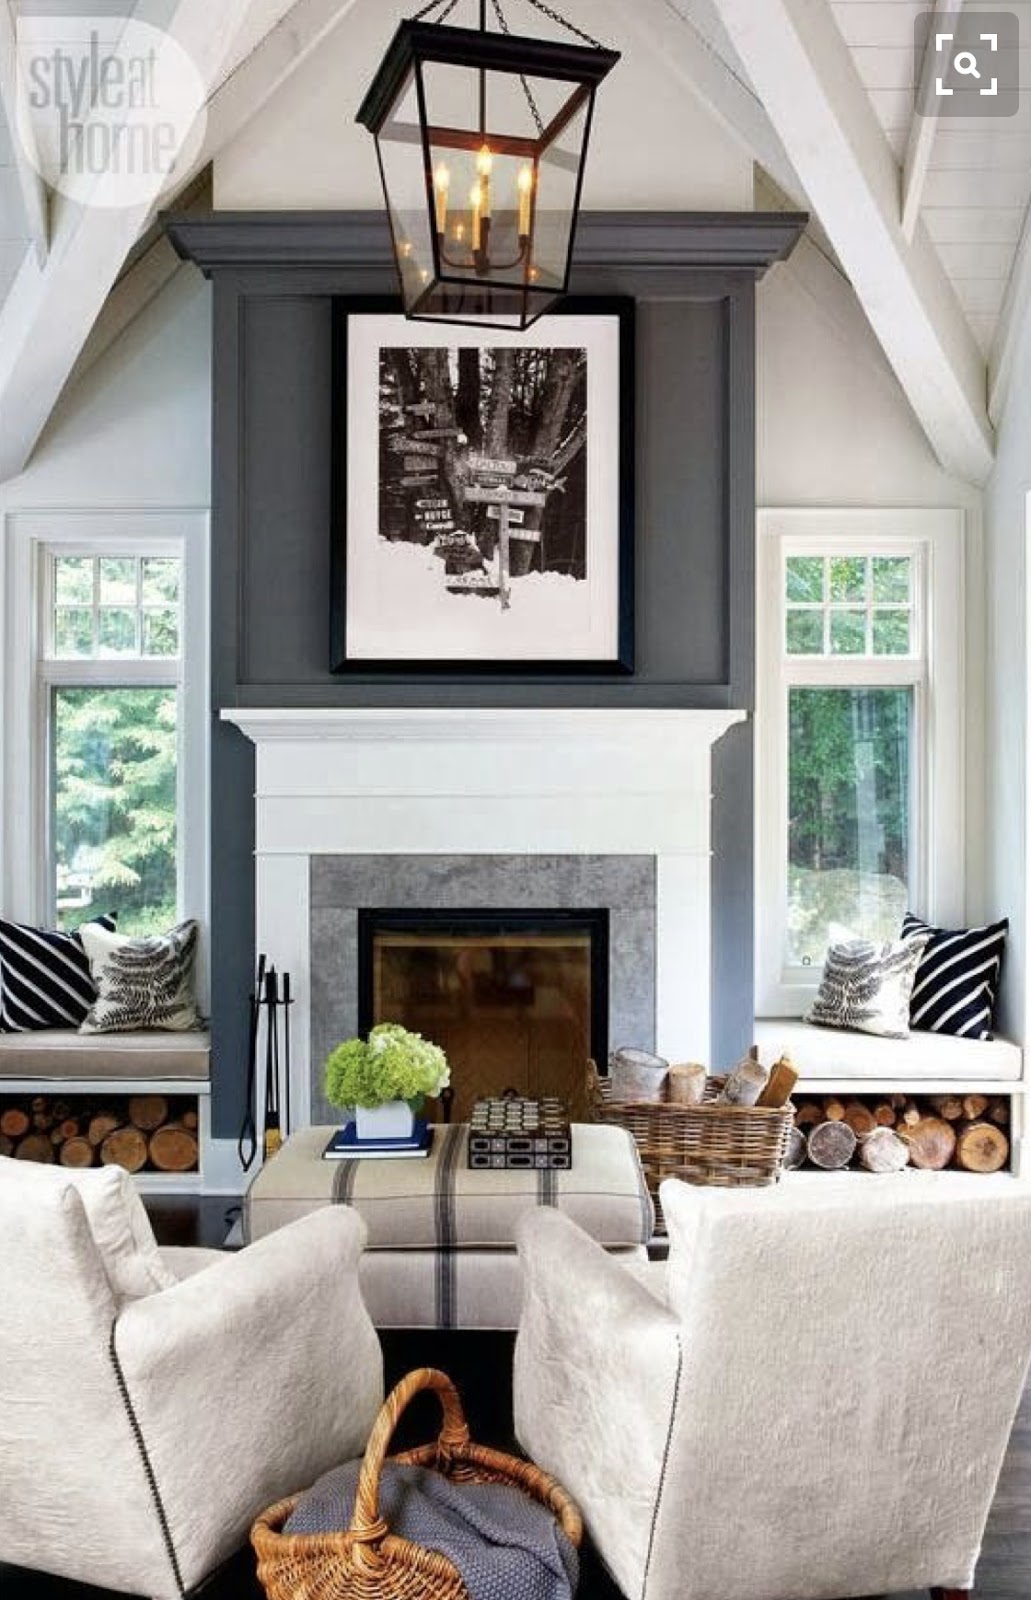 Style at Home family room with dark fireplace